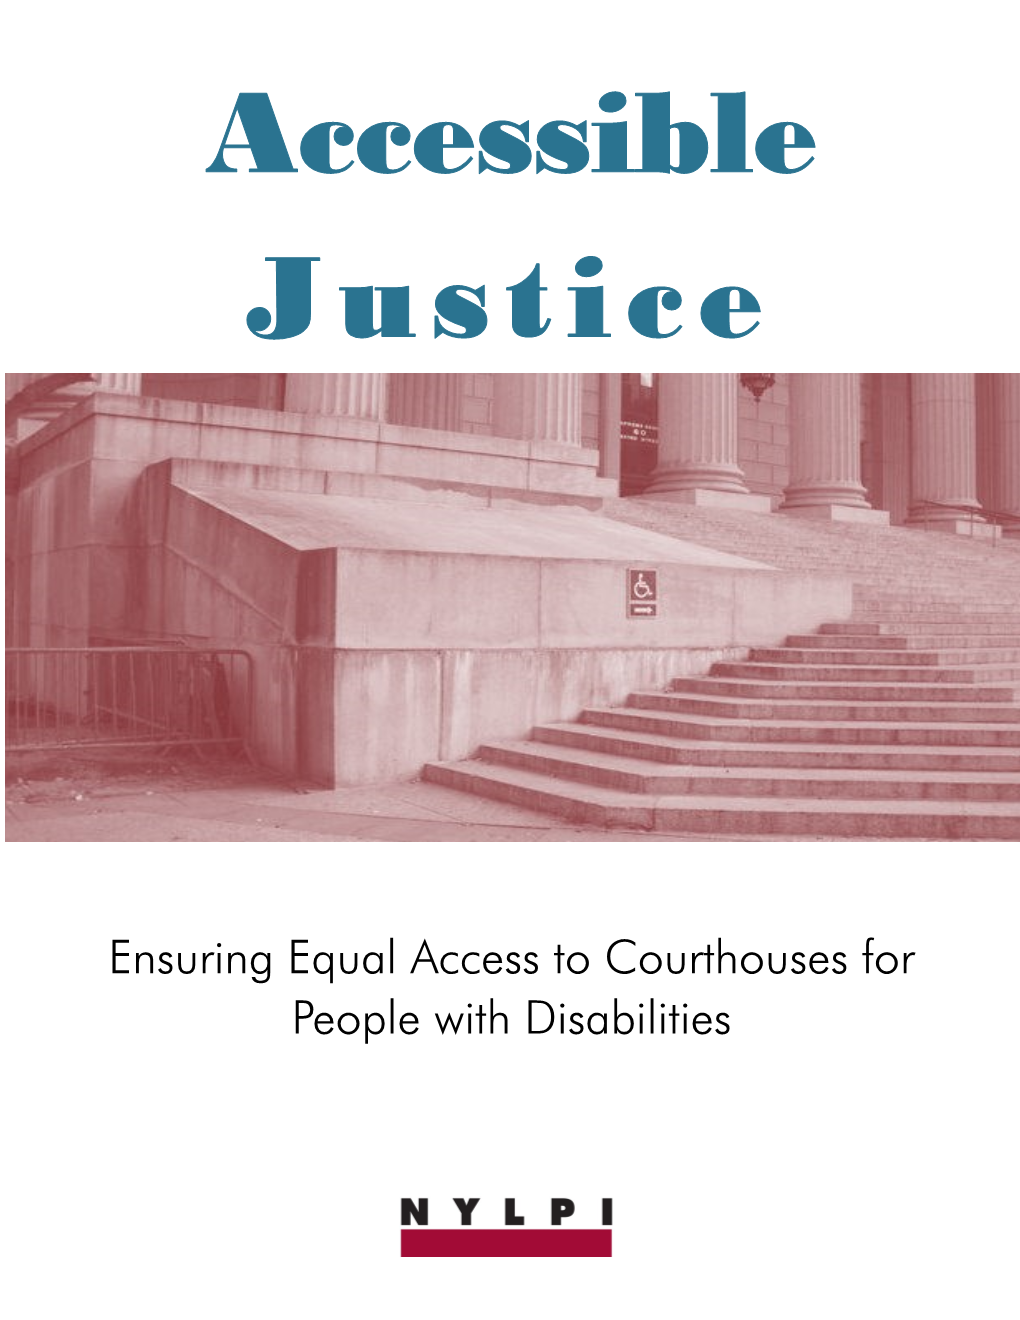 Accessible Justice: Ensuring Equal Access to Courthouses for People